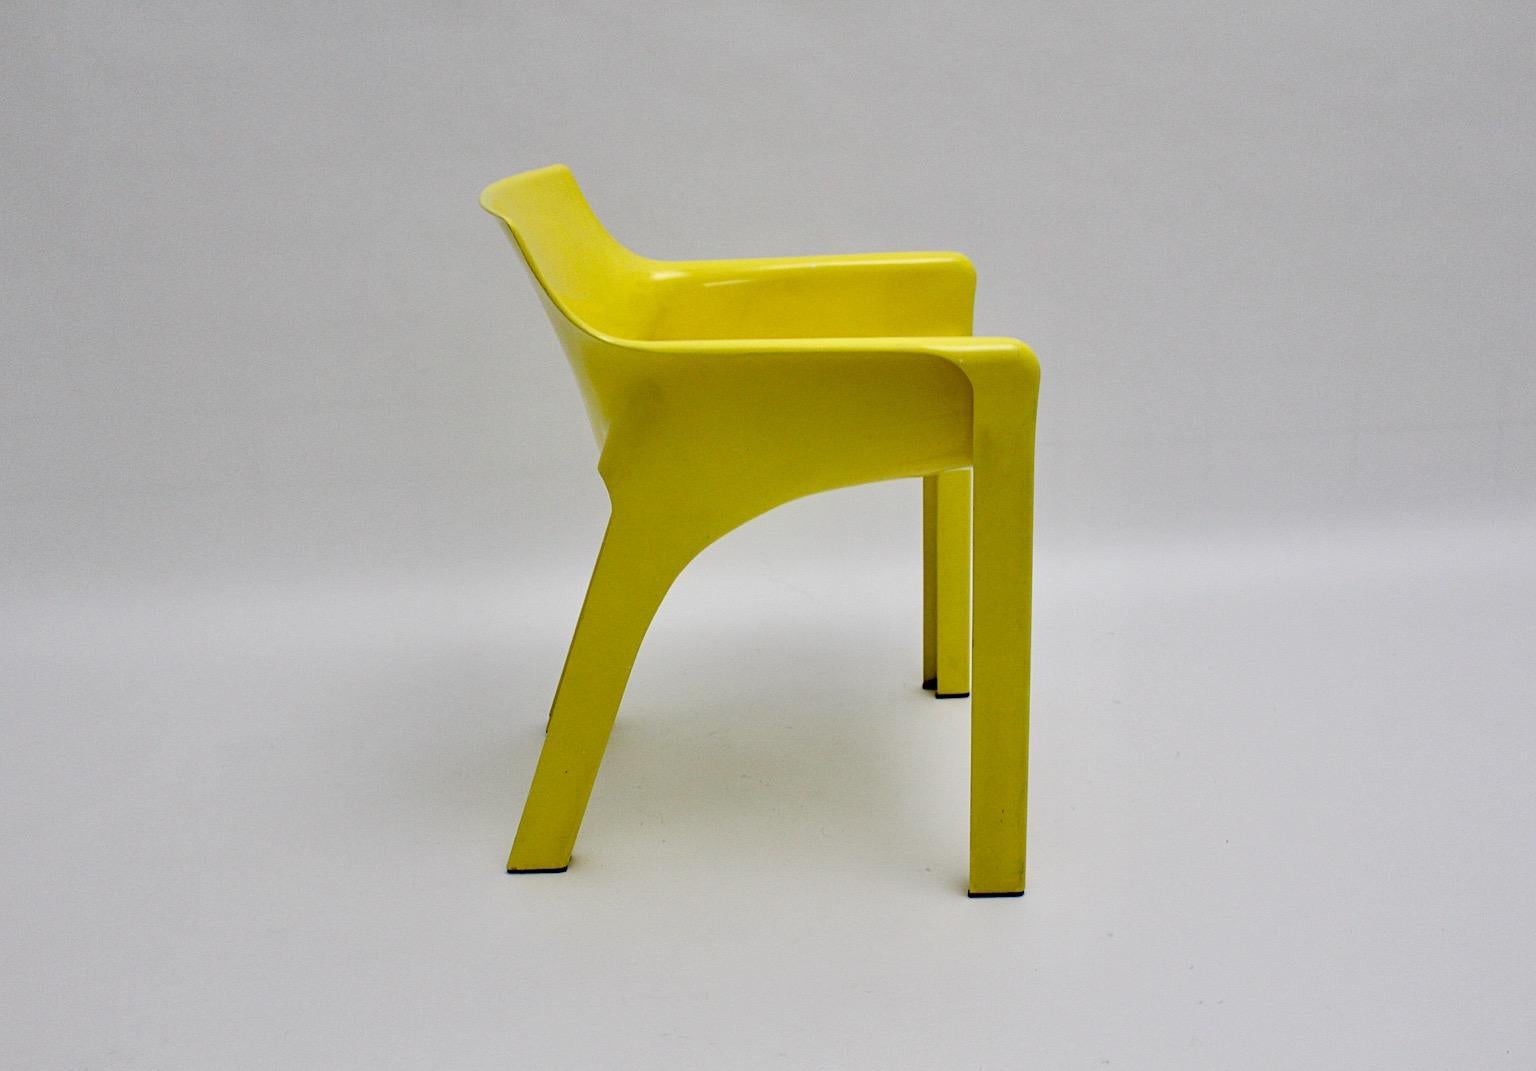 Space Age Vintage Yellow Plastic Armchair Gaudi by Vico Magistretti 1968 Italy For Sale 5